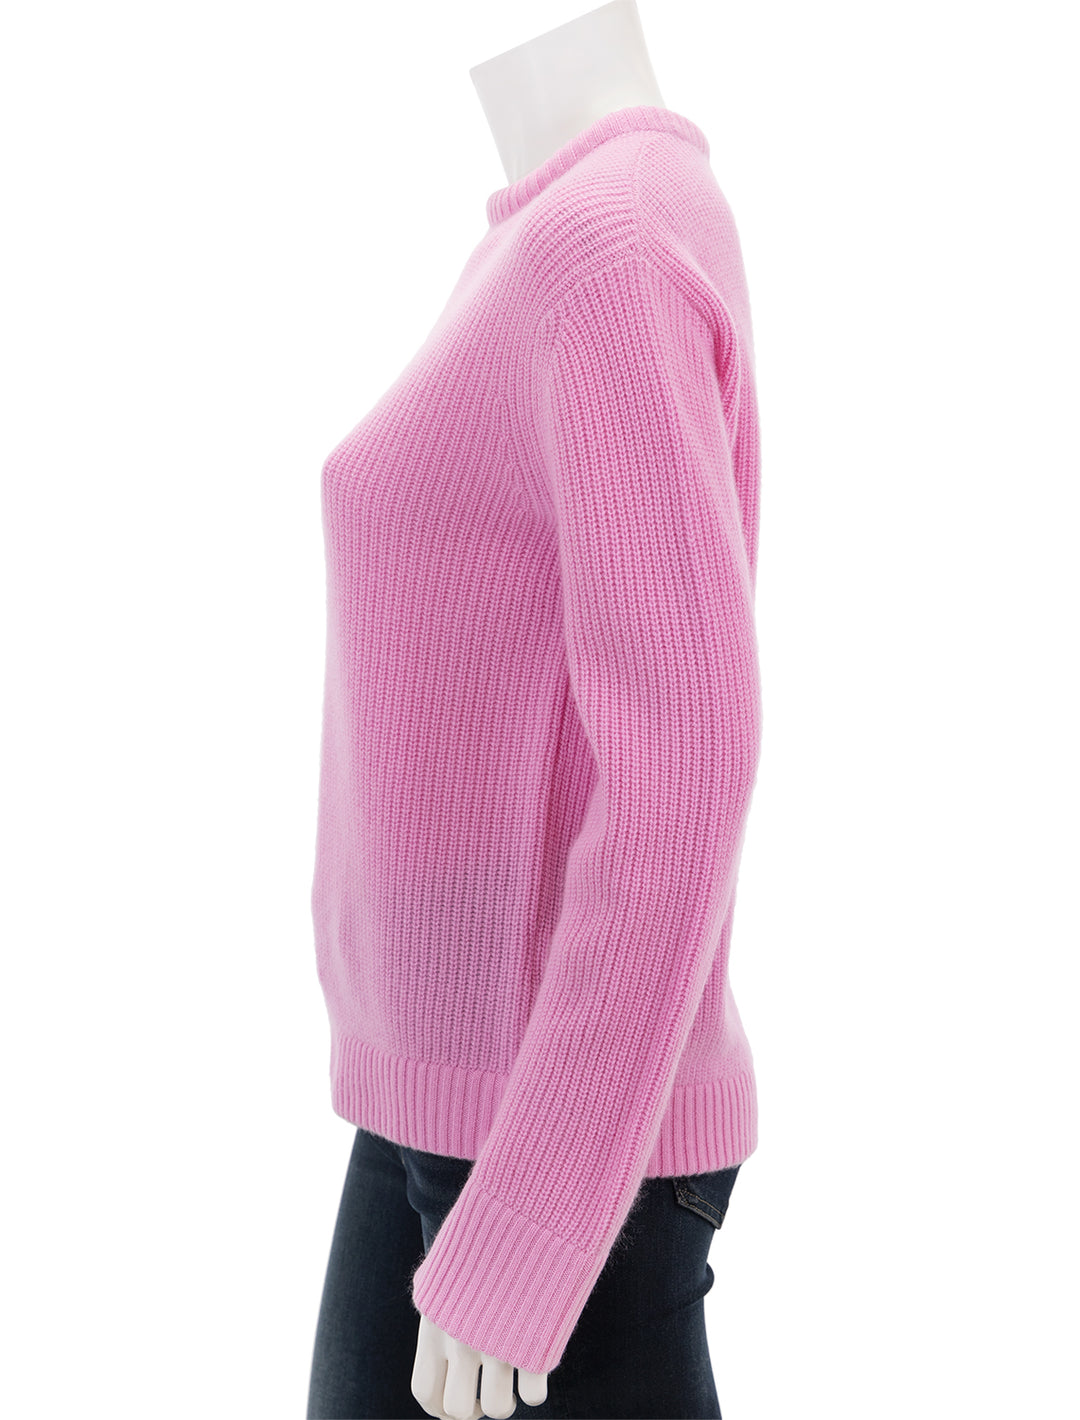 Side view of KULE's the alden sweater in pink.